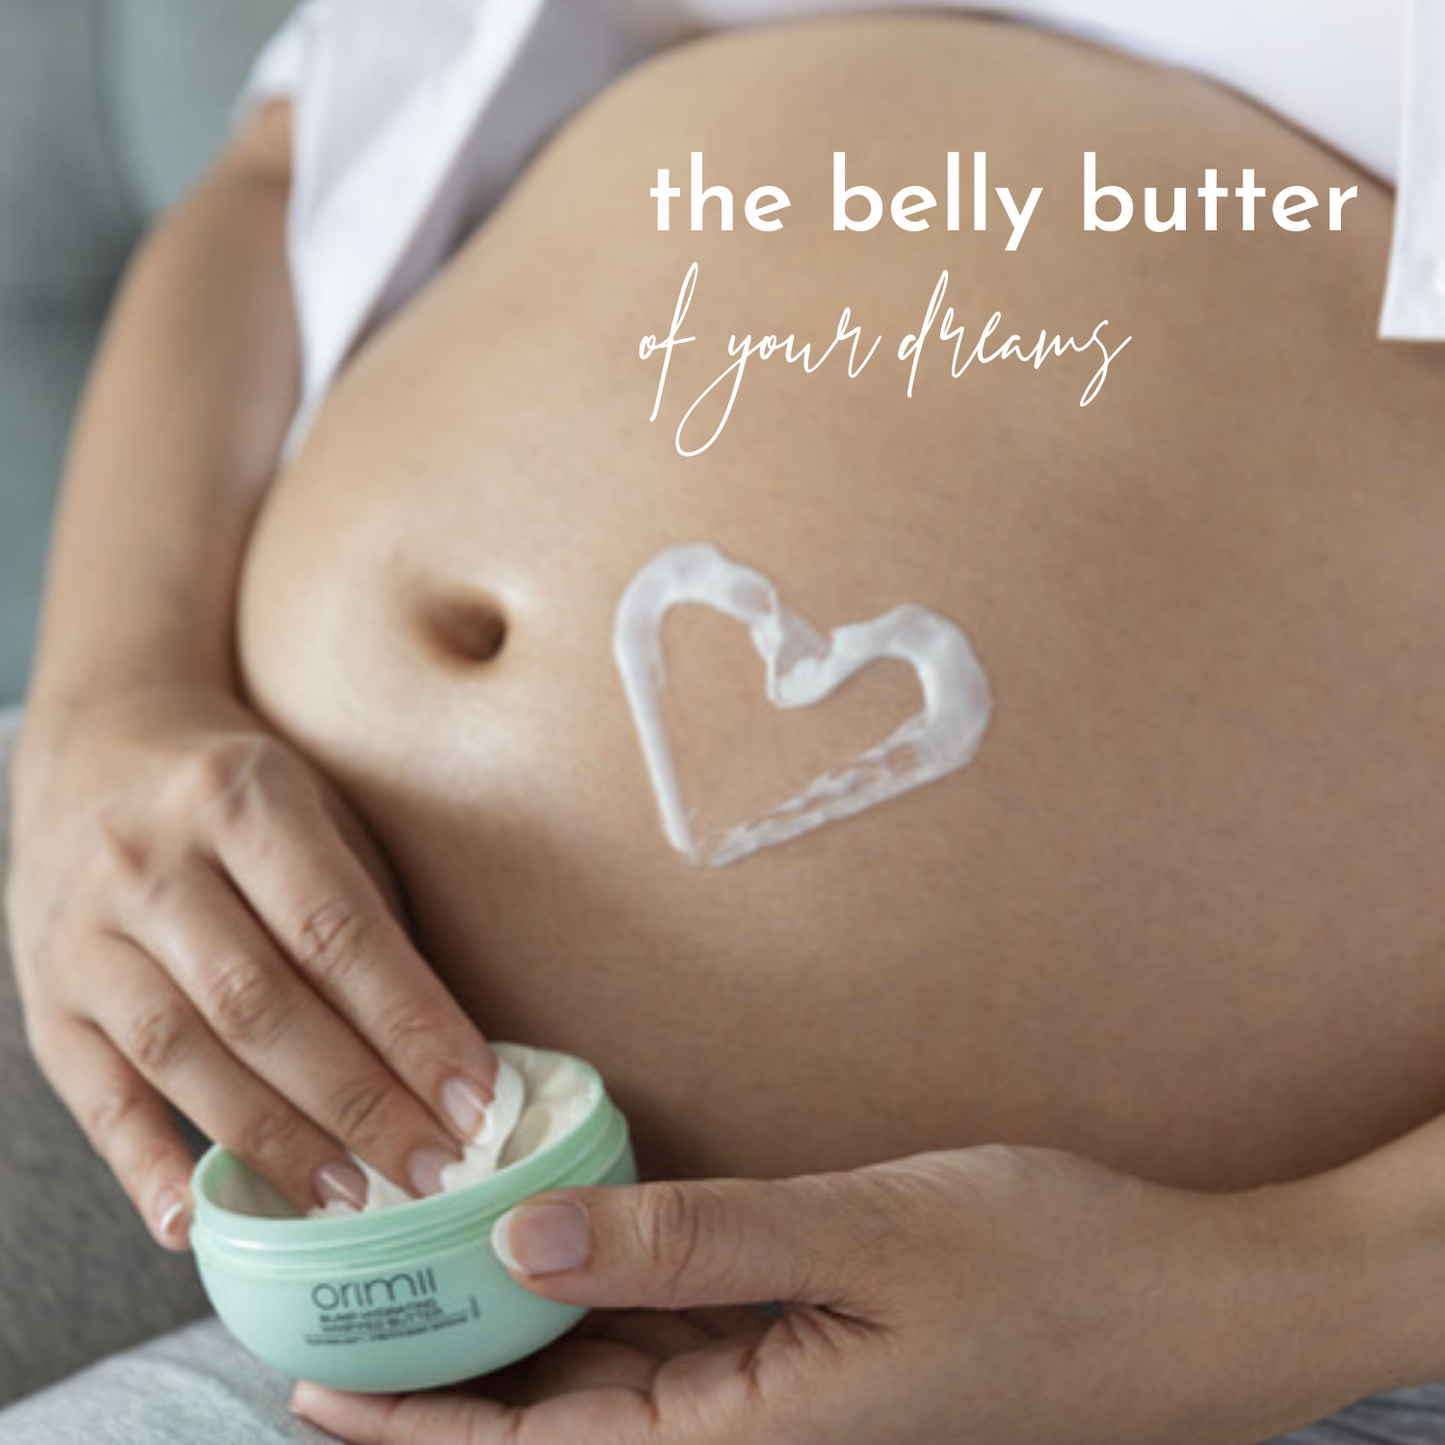 Bump Hydrating Whipped Butter